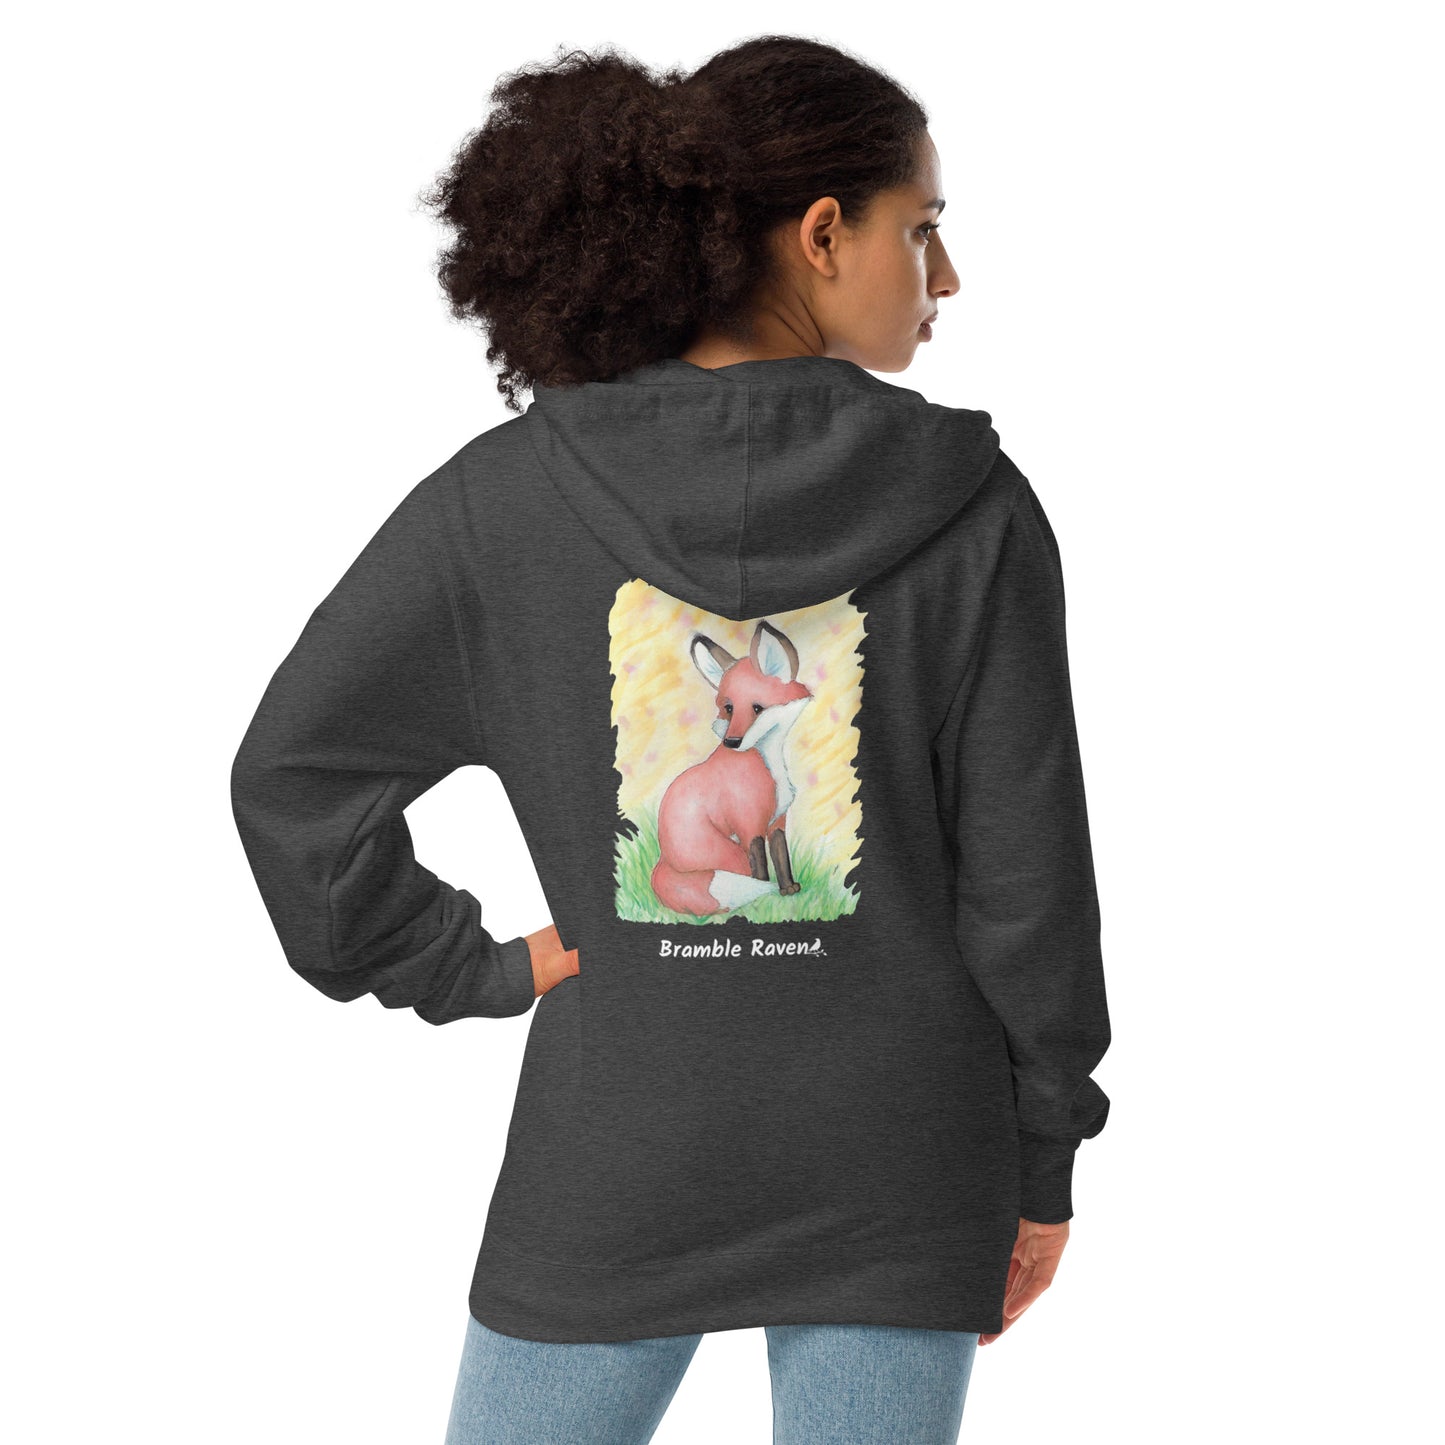 Unisex charcoal heather grey colored zip-up fleece-lined hoodie. Features original watercolor painting of a fox sitting in the grass on the back of the hoodie. Shown on female model.